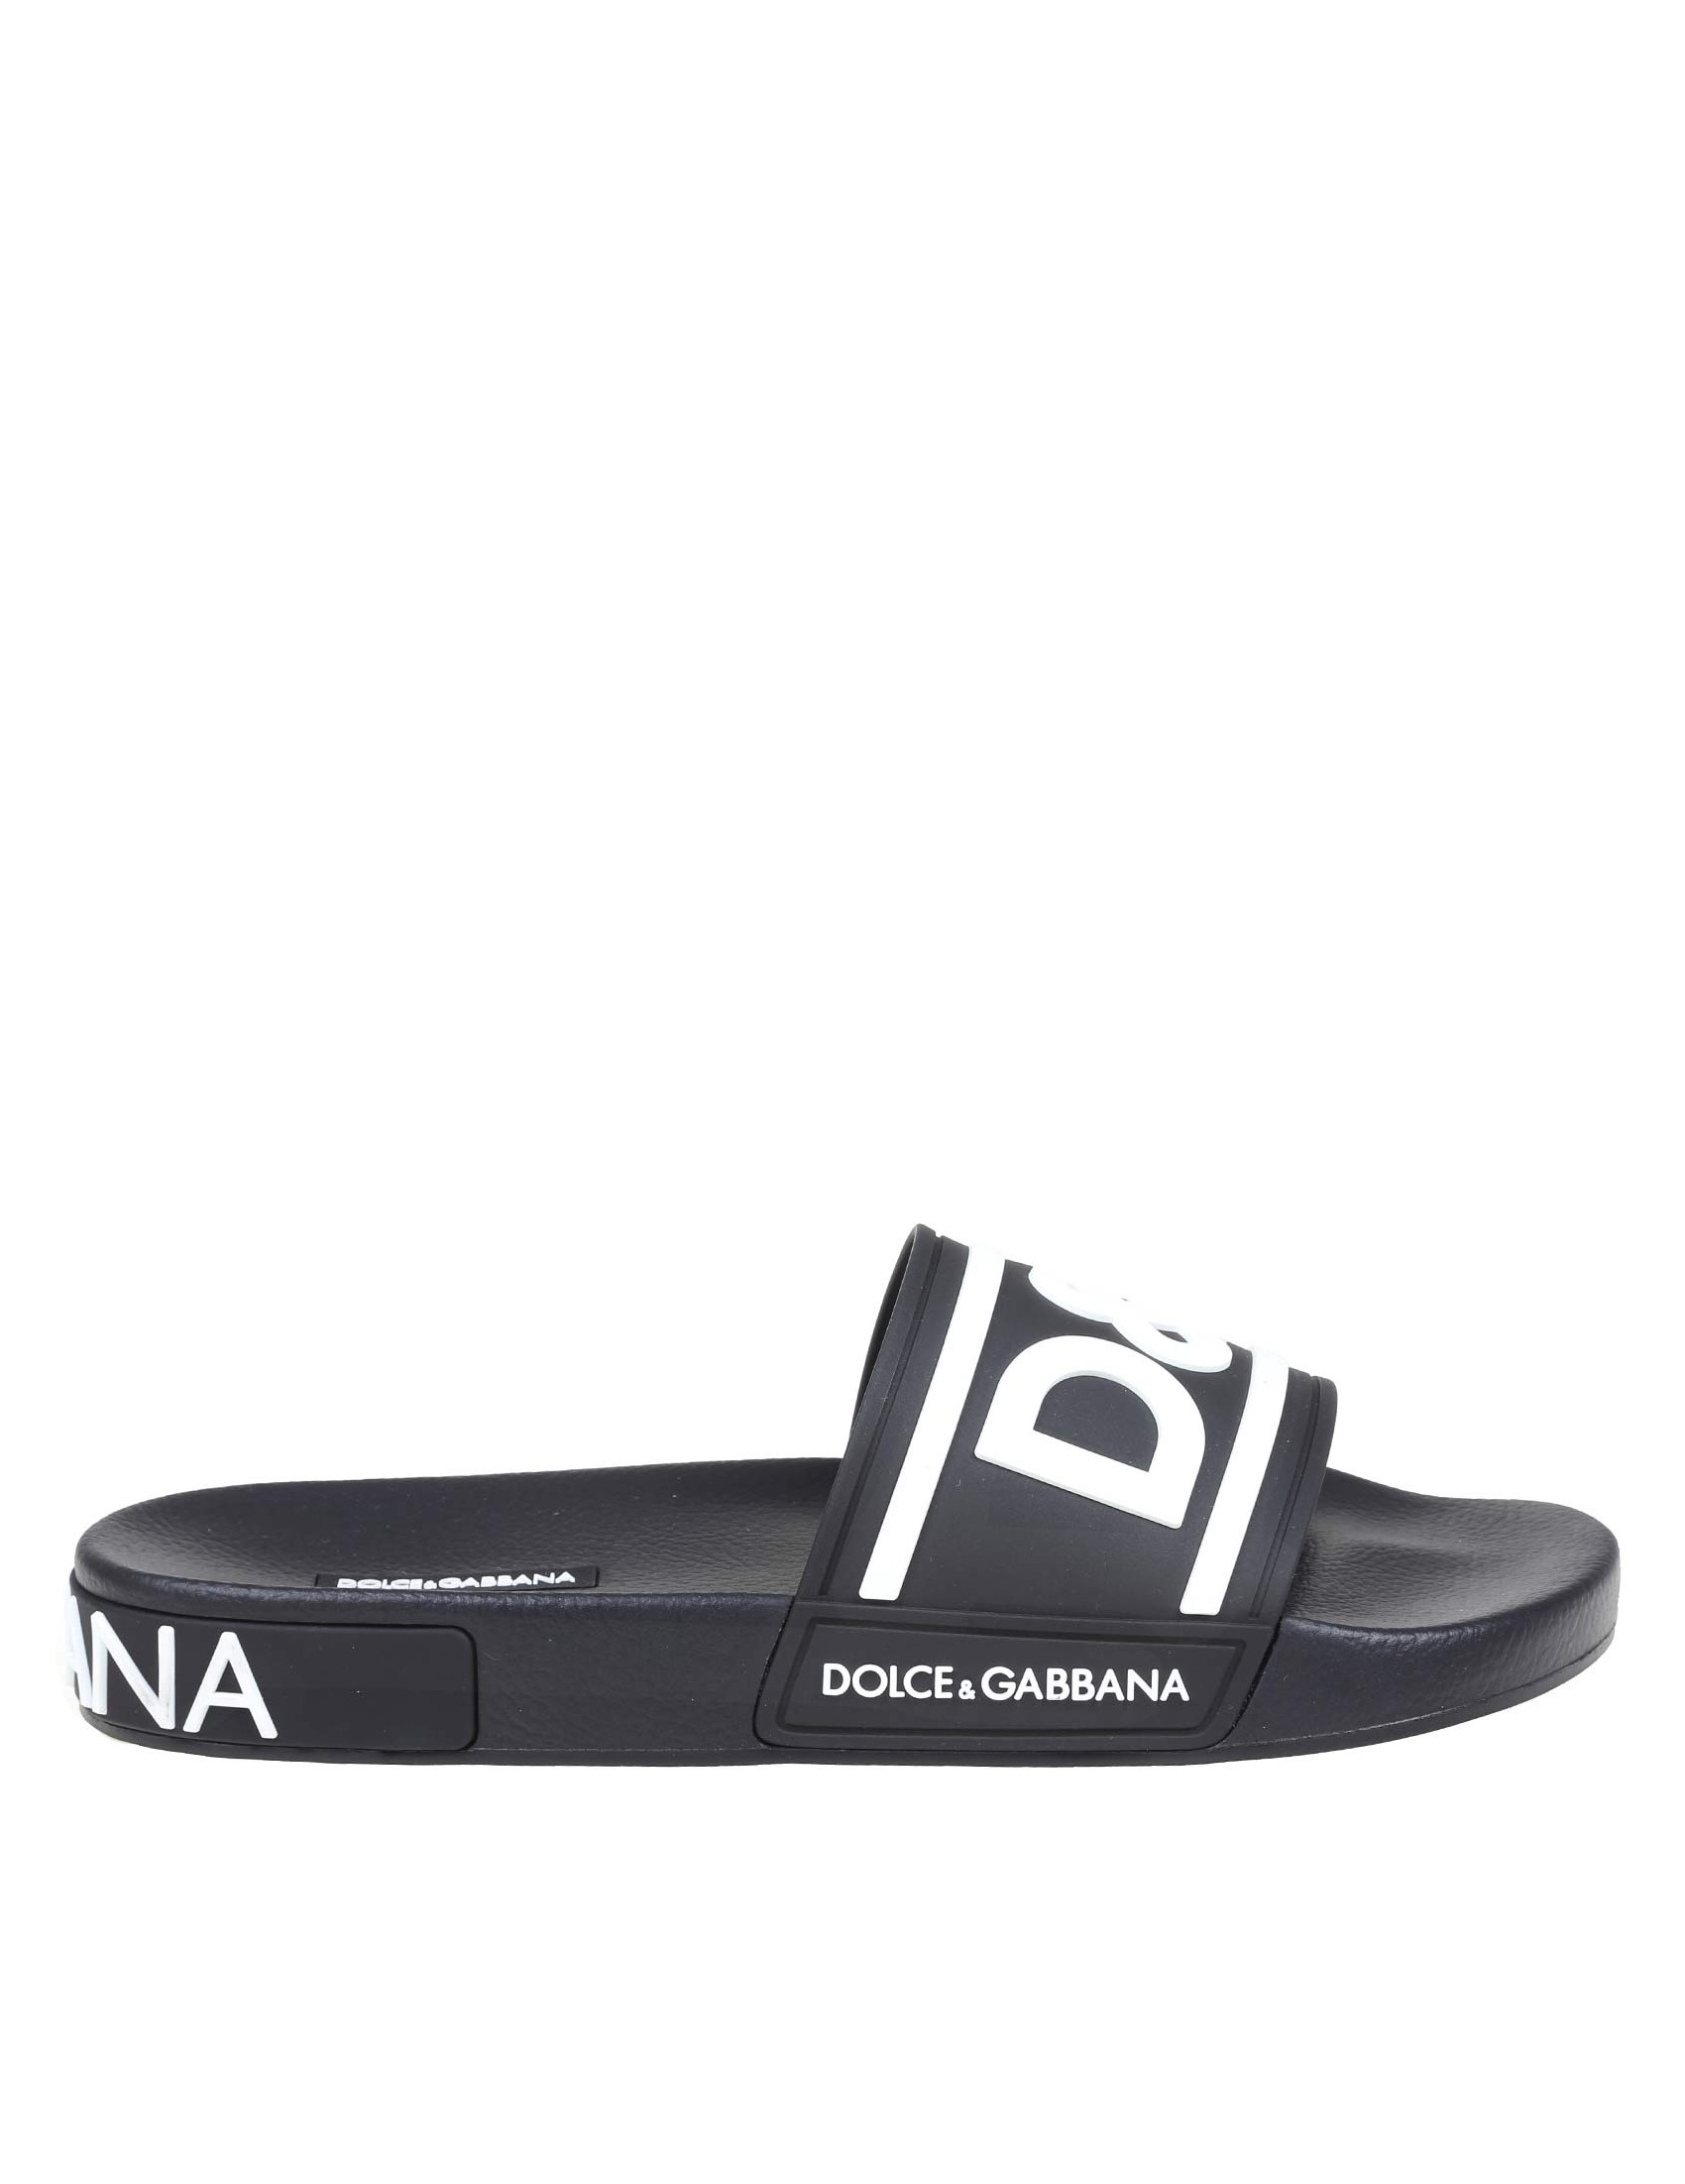 DOLCE & GABBANA RUBBER SLIPPERS WITH BLACK LOGO